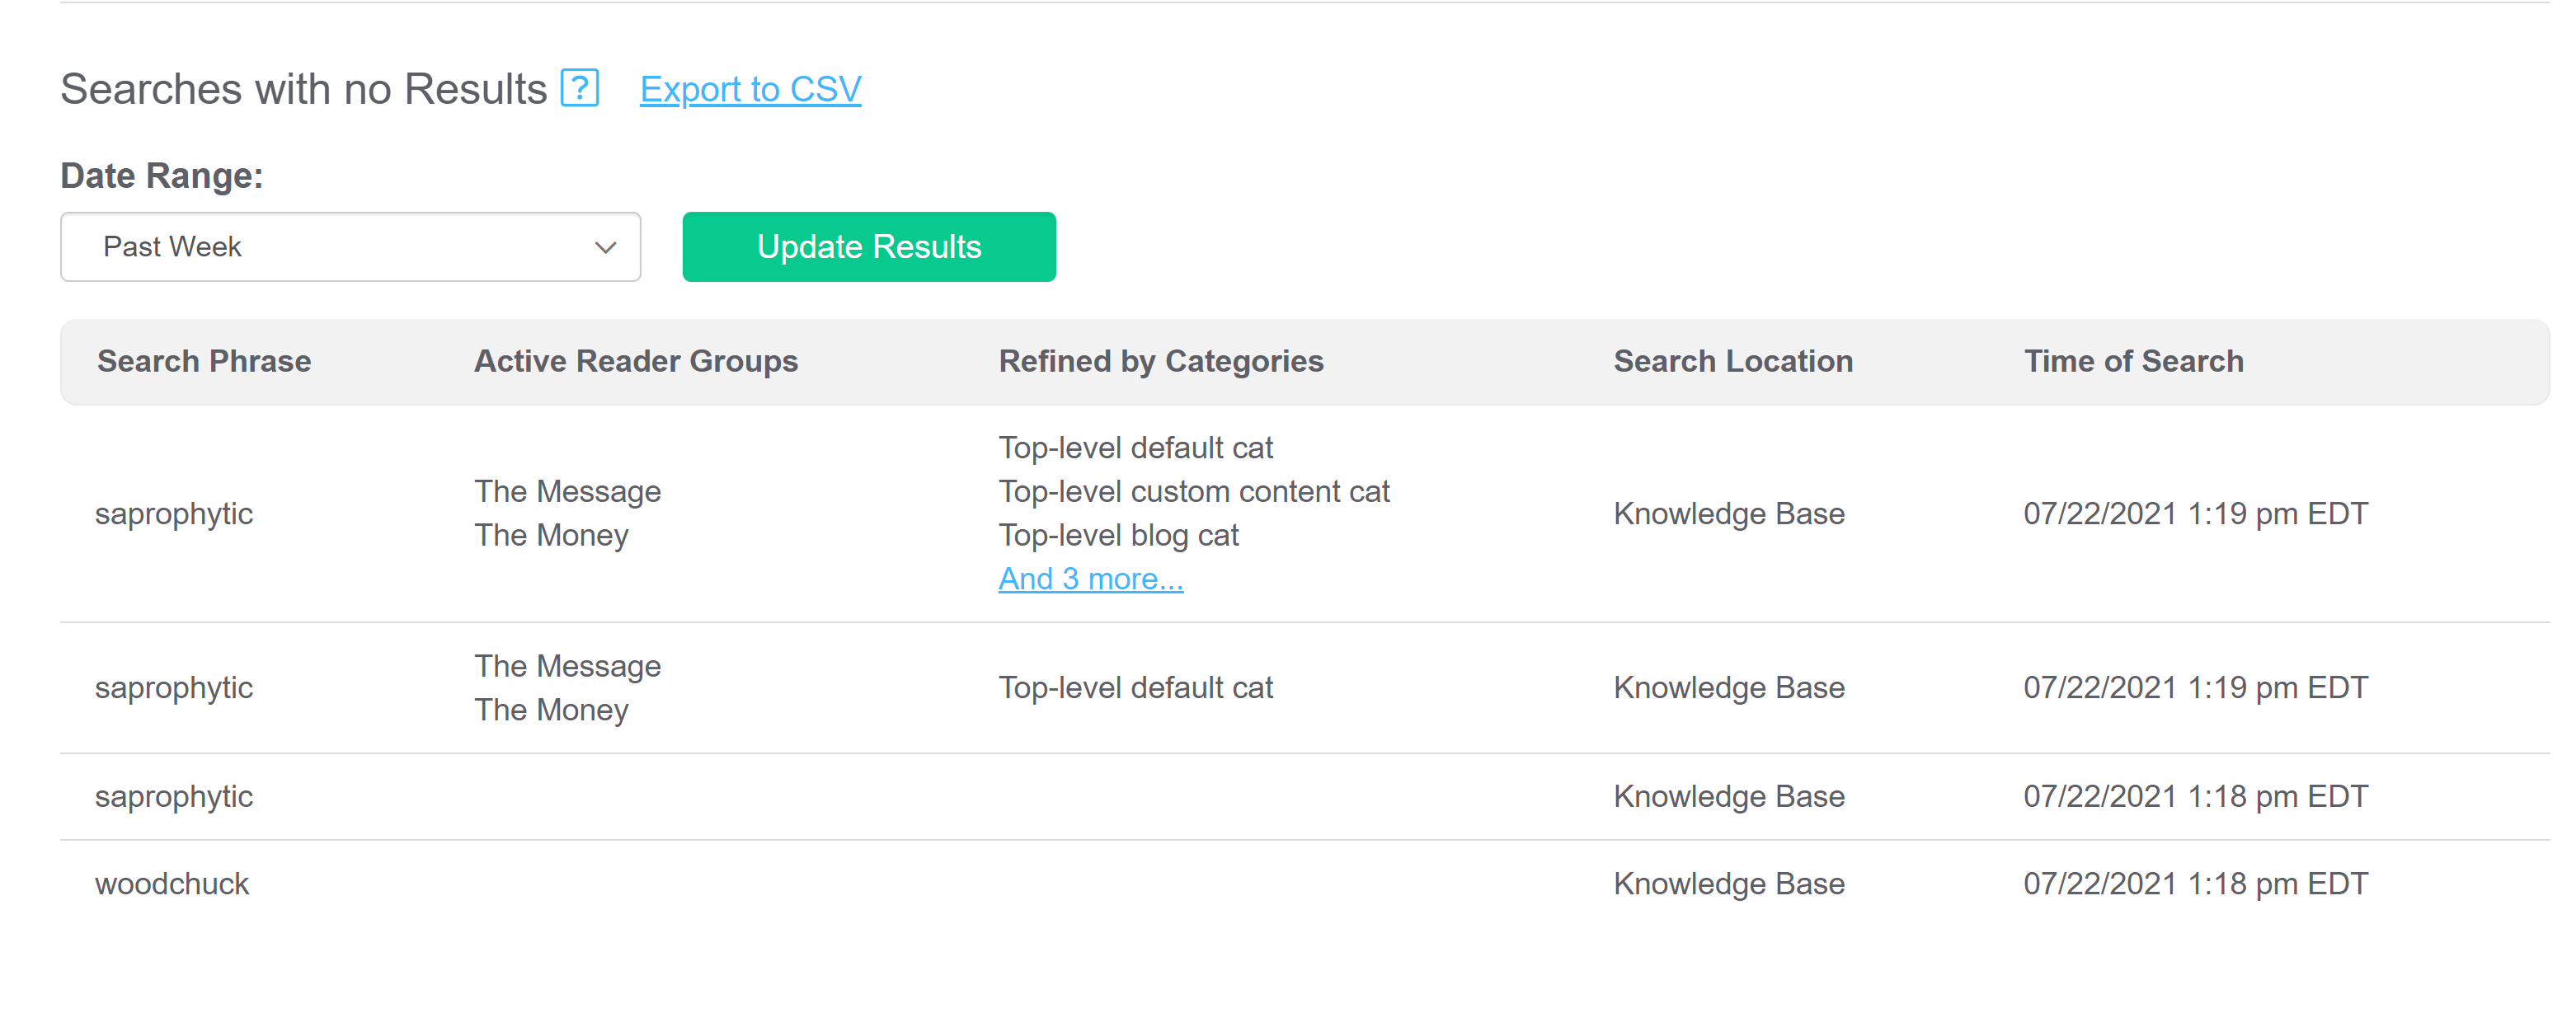 Screenshot of a Searches with no Results report